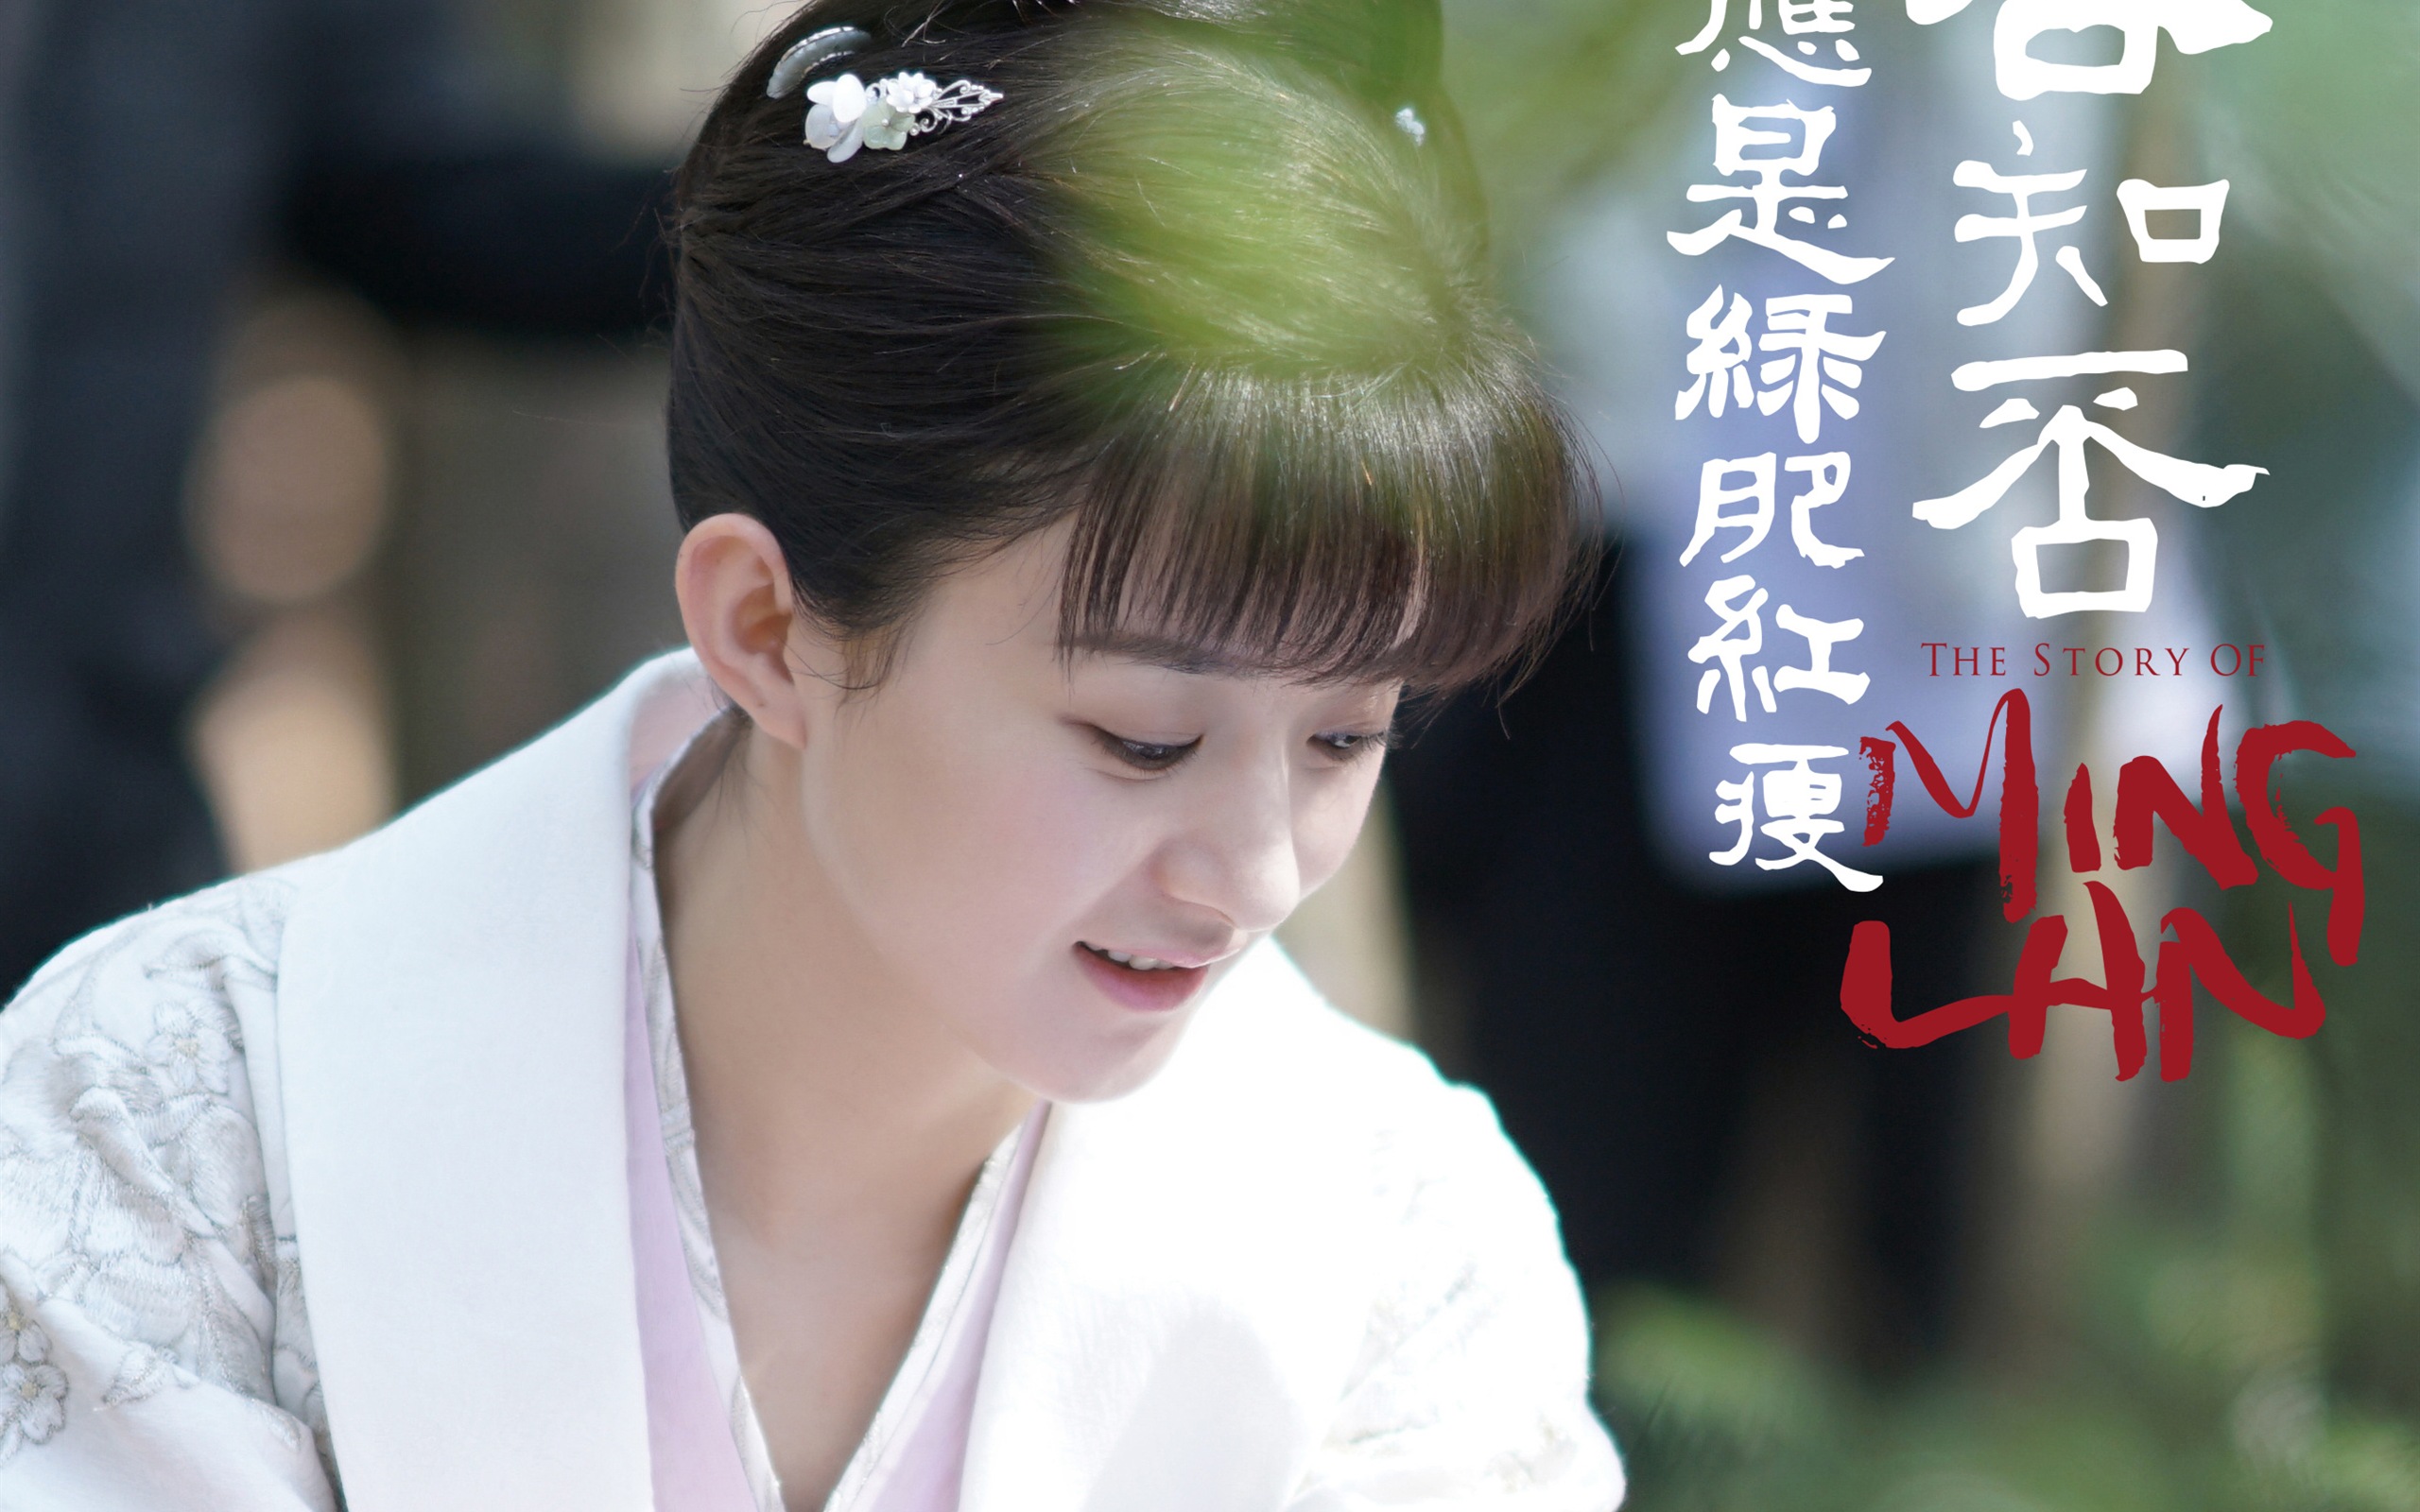 The Story Of MingLan, TV series HD wallpapers #27 - 2560x1600